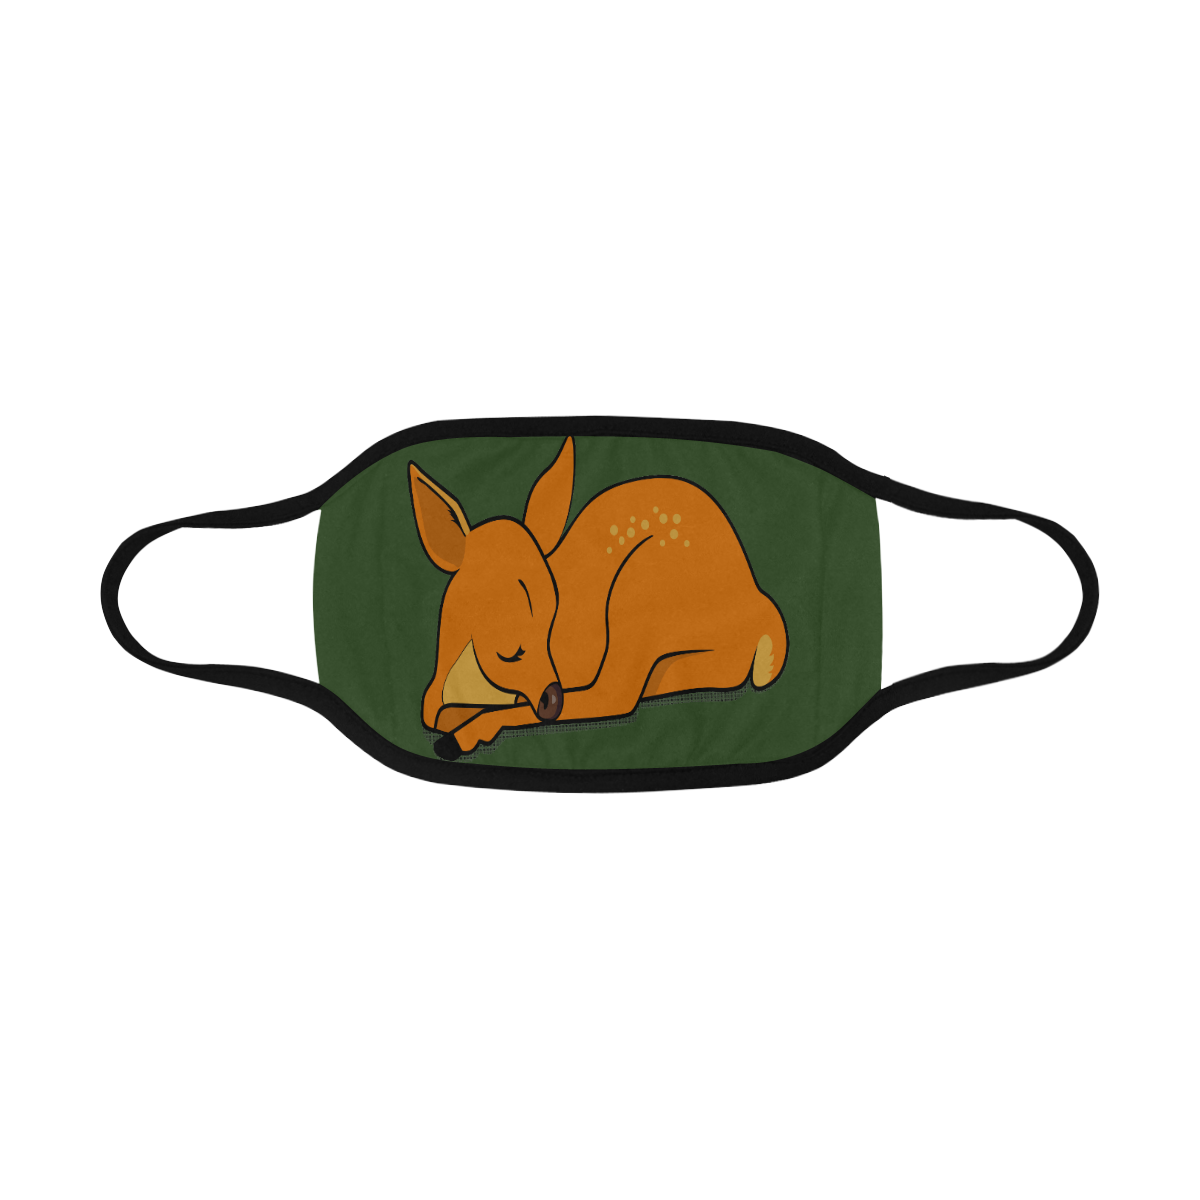 Fawn-ed of sleep Mouth Mask